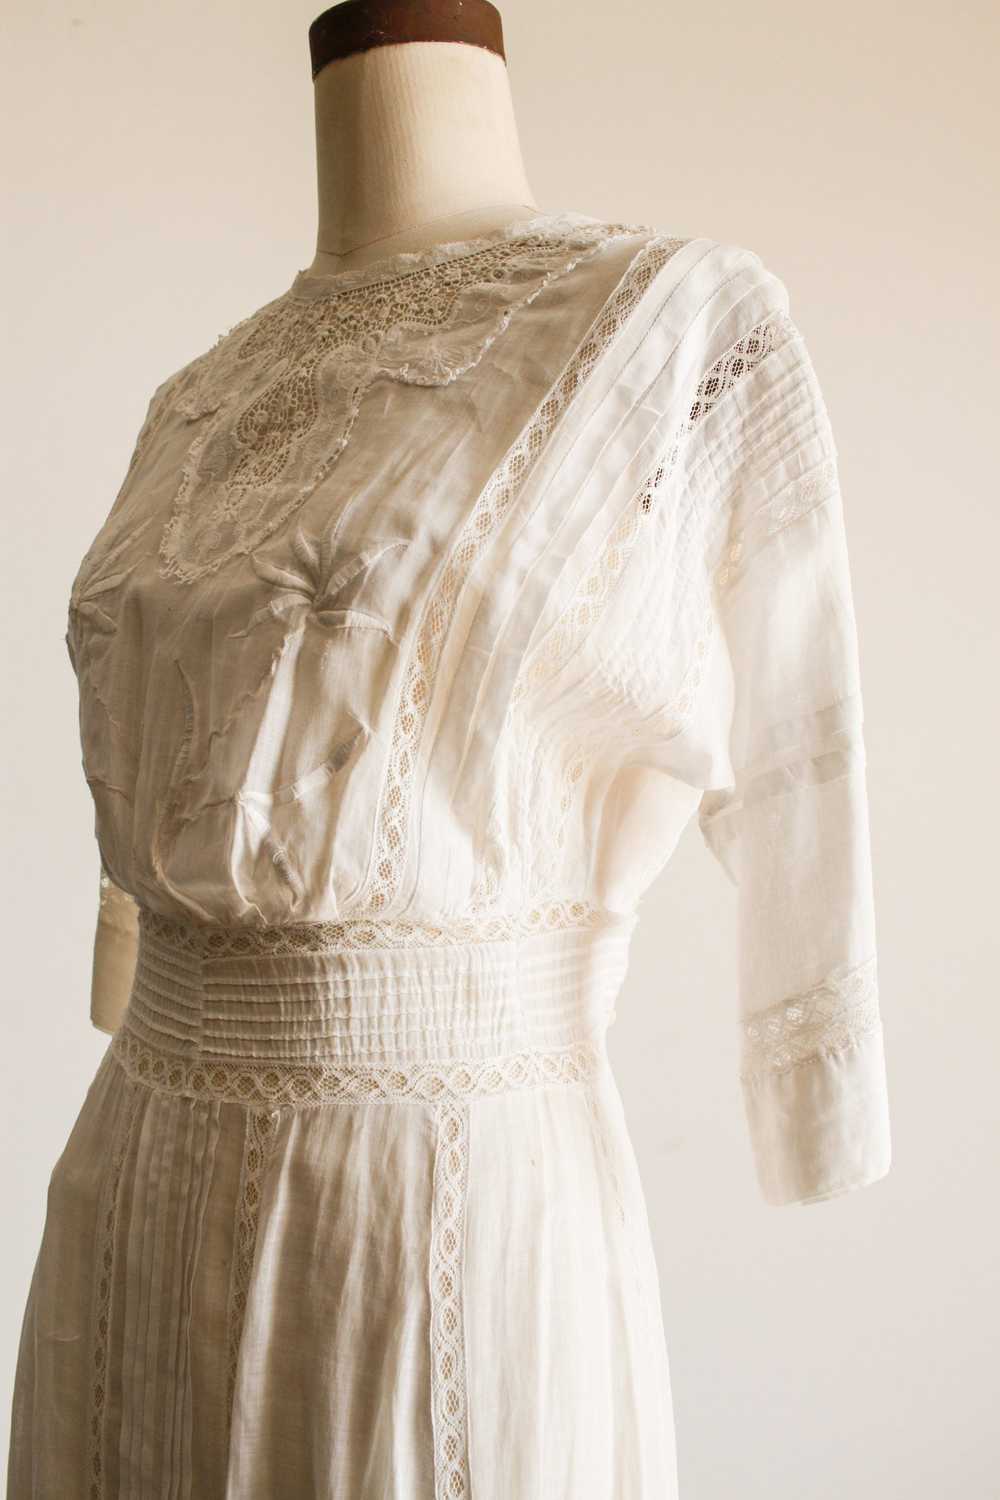 Edwardian White Cotton Voile Embroidered Lawn Dre… - image 7